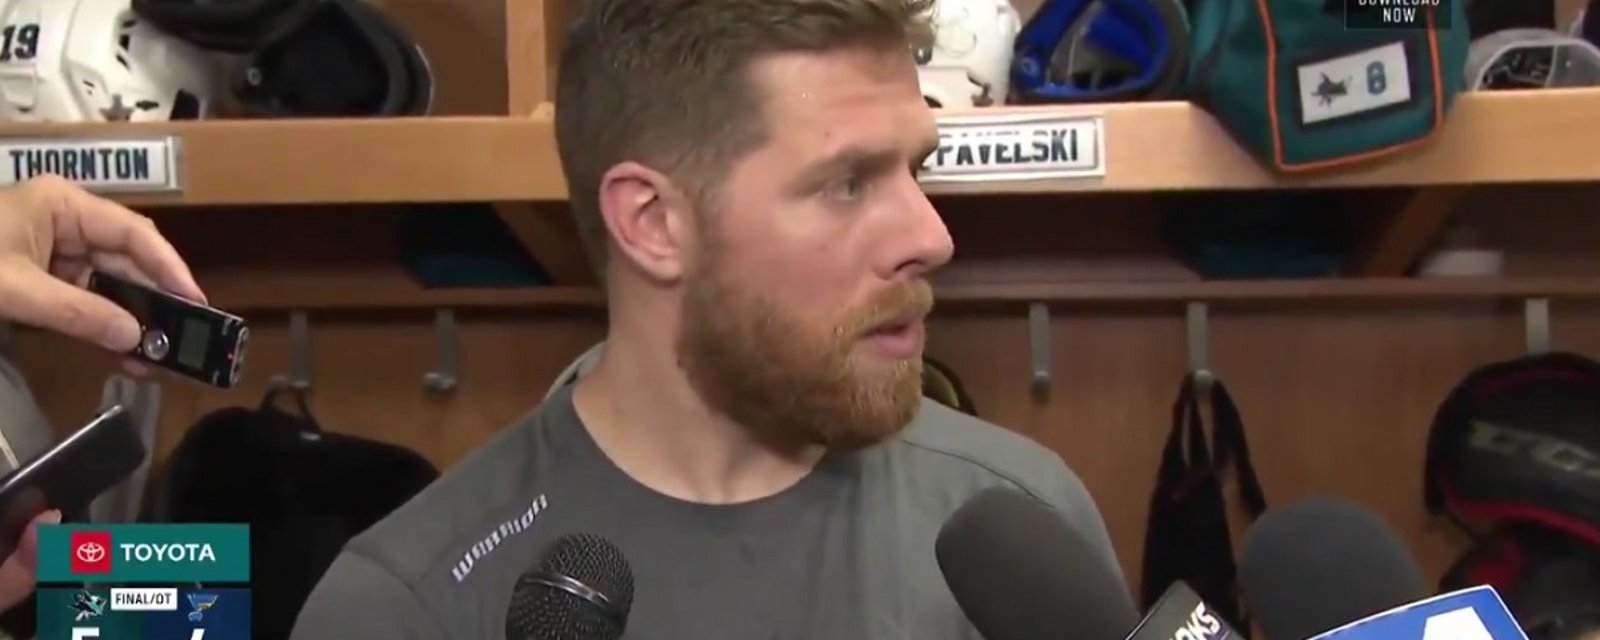 Sharks captain Joe Pavelski comments on the state of officiating in the playoffs.